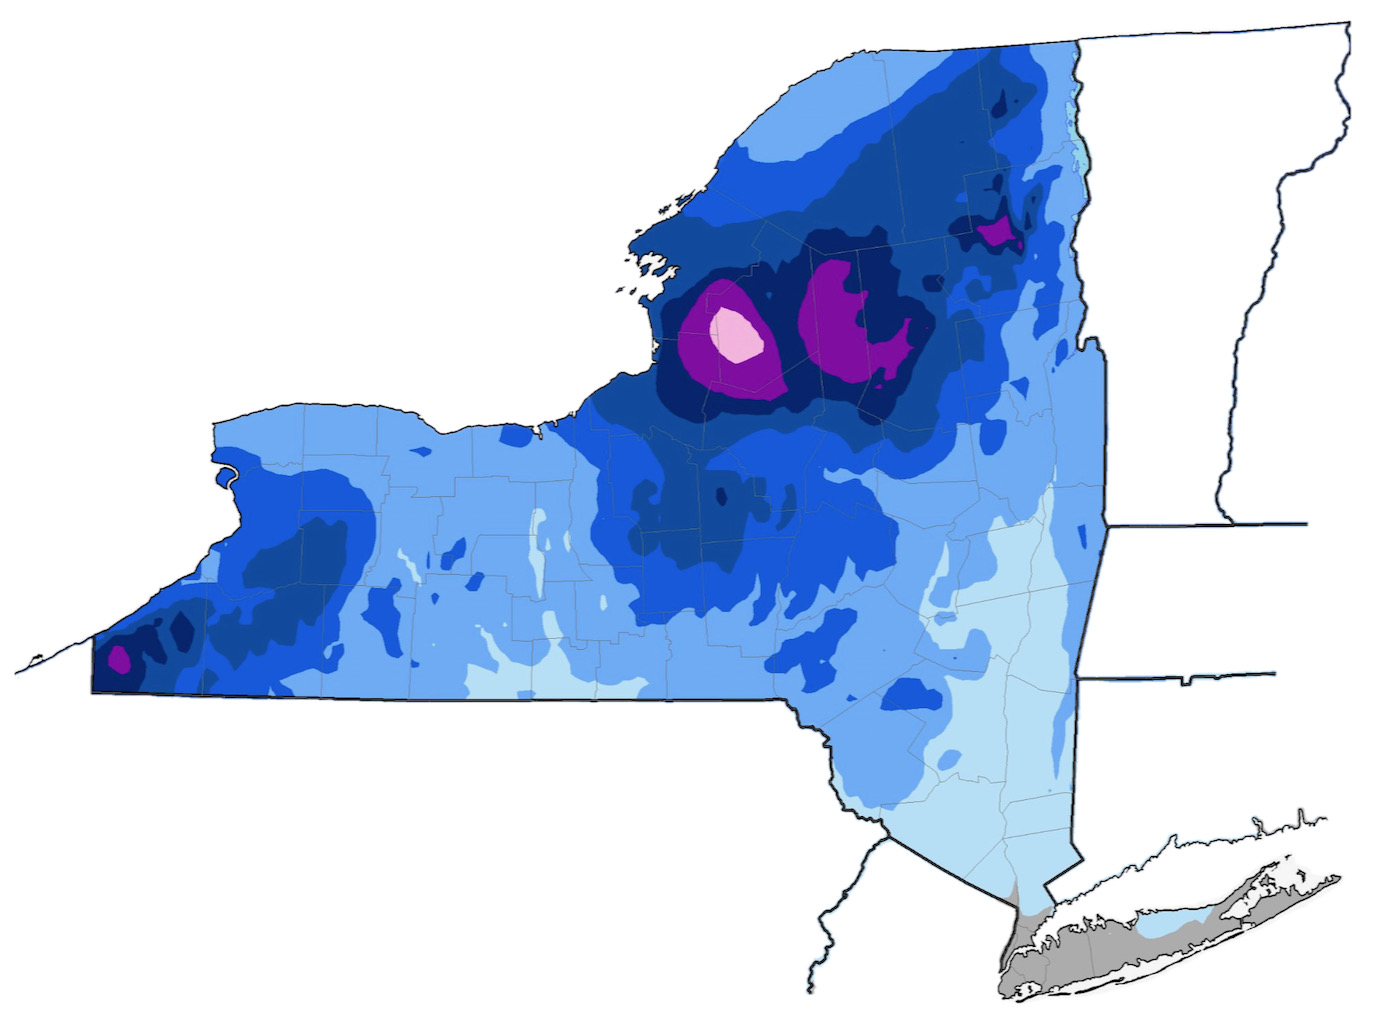 Snow Map Shows States Where Snow Depth Will Be Highest